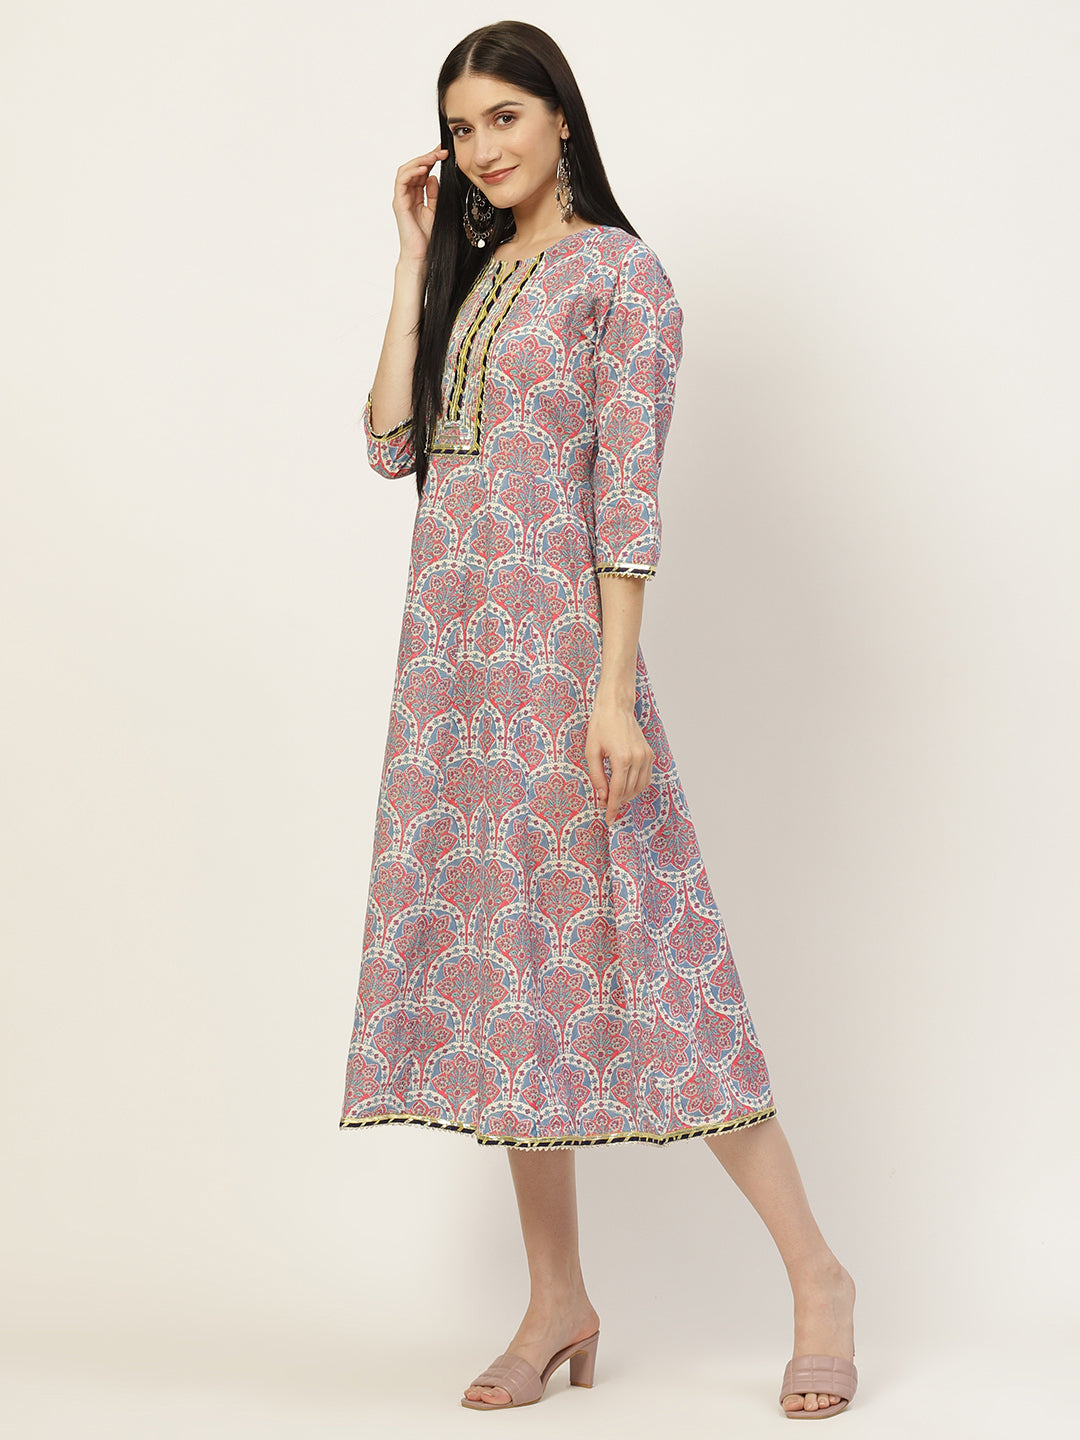 Blue & Pink Printed Fit & Flare Dress - AbirabyBeena